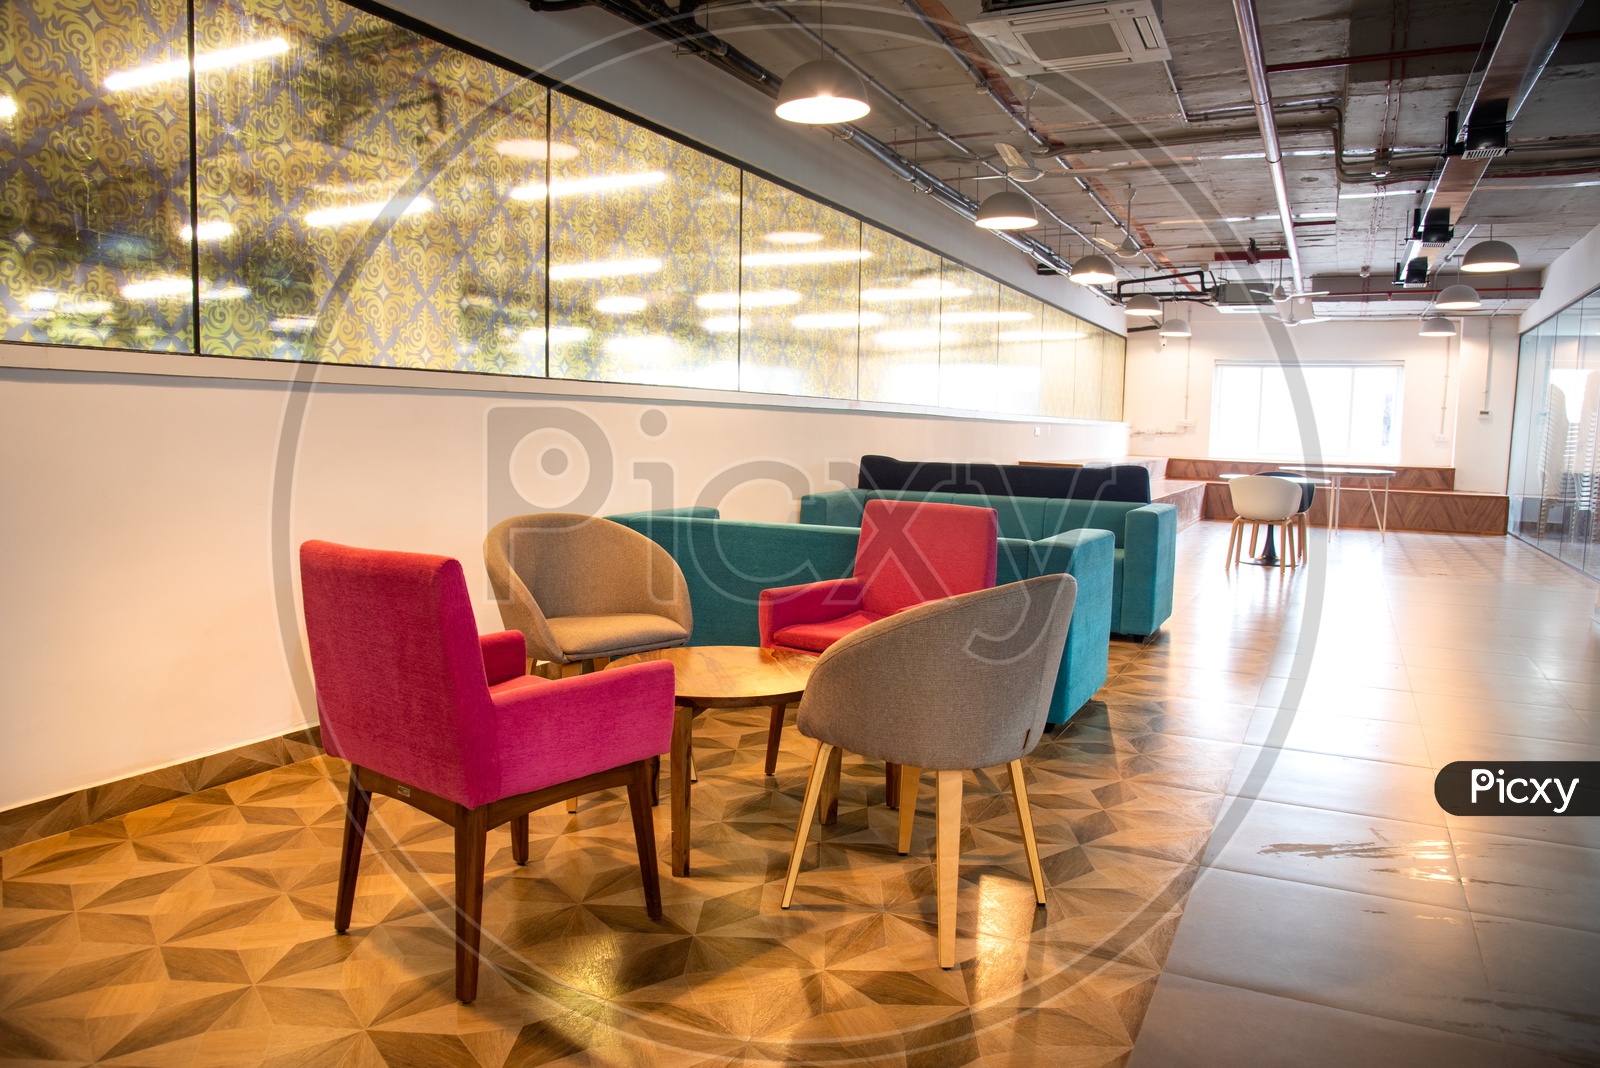 Recreation lounges inside corporate coworking spaces